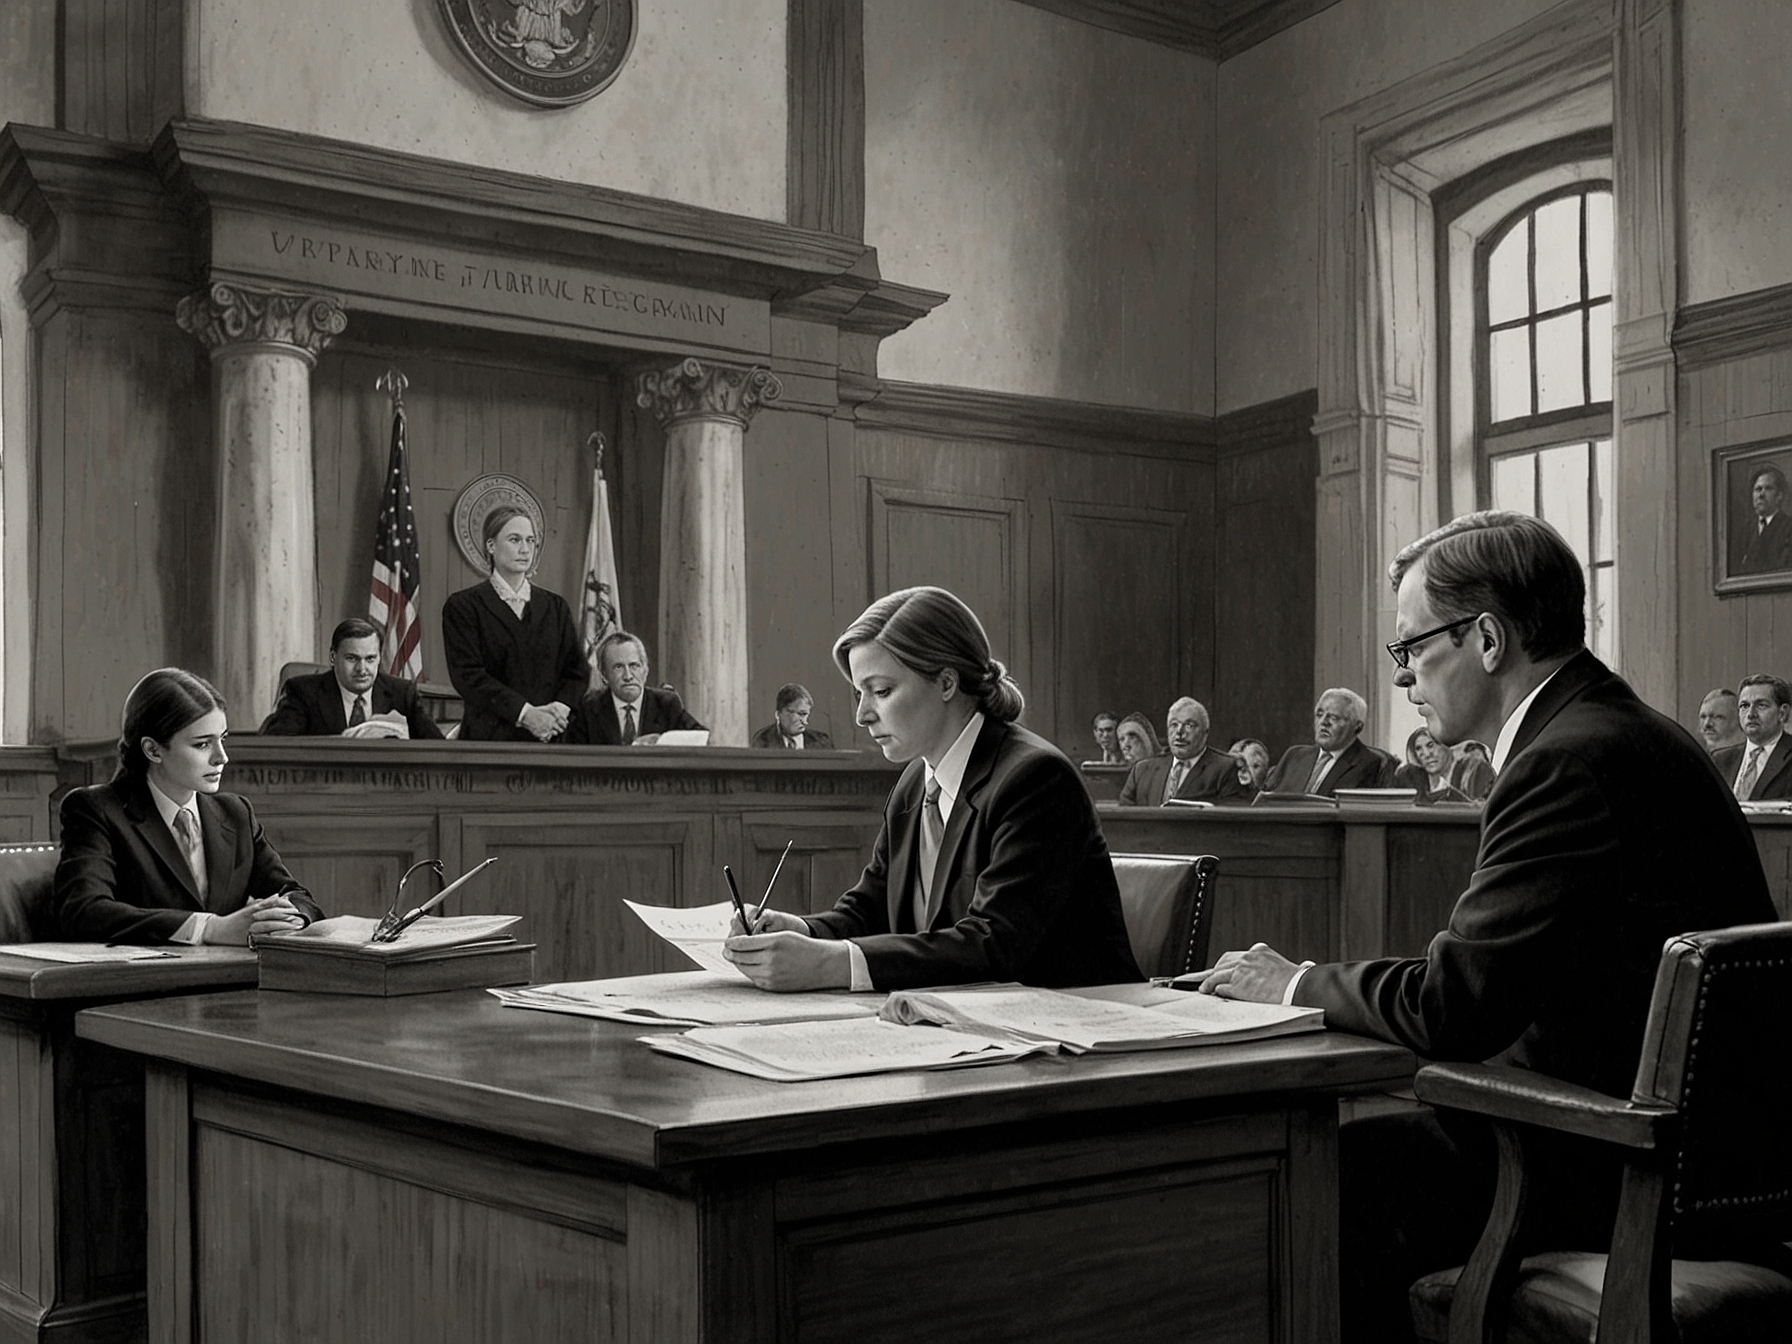 An image depicting a courtroom scene with a federal judge reviewing legal documents, illustrating the pivotal judicial review of potential changes to the Flores Settlement oversight of child migrants.